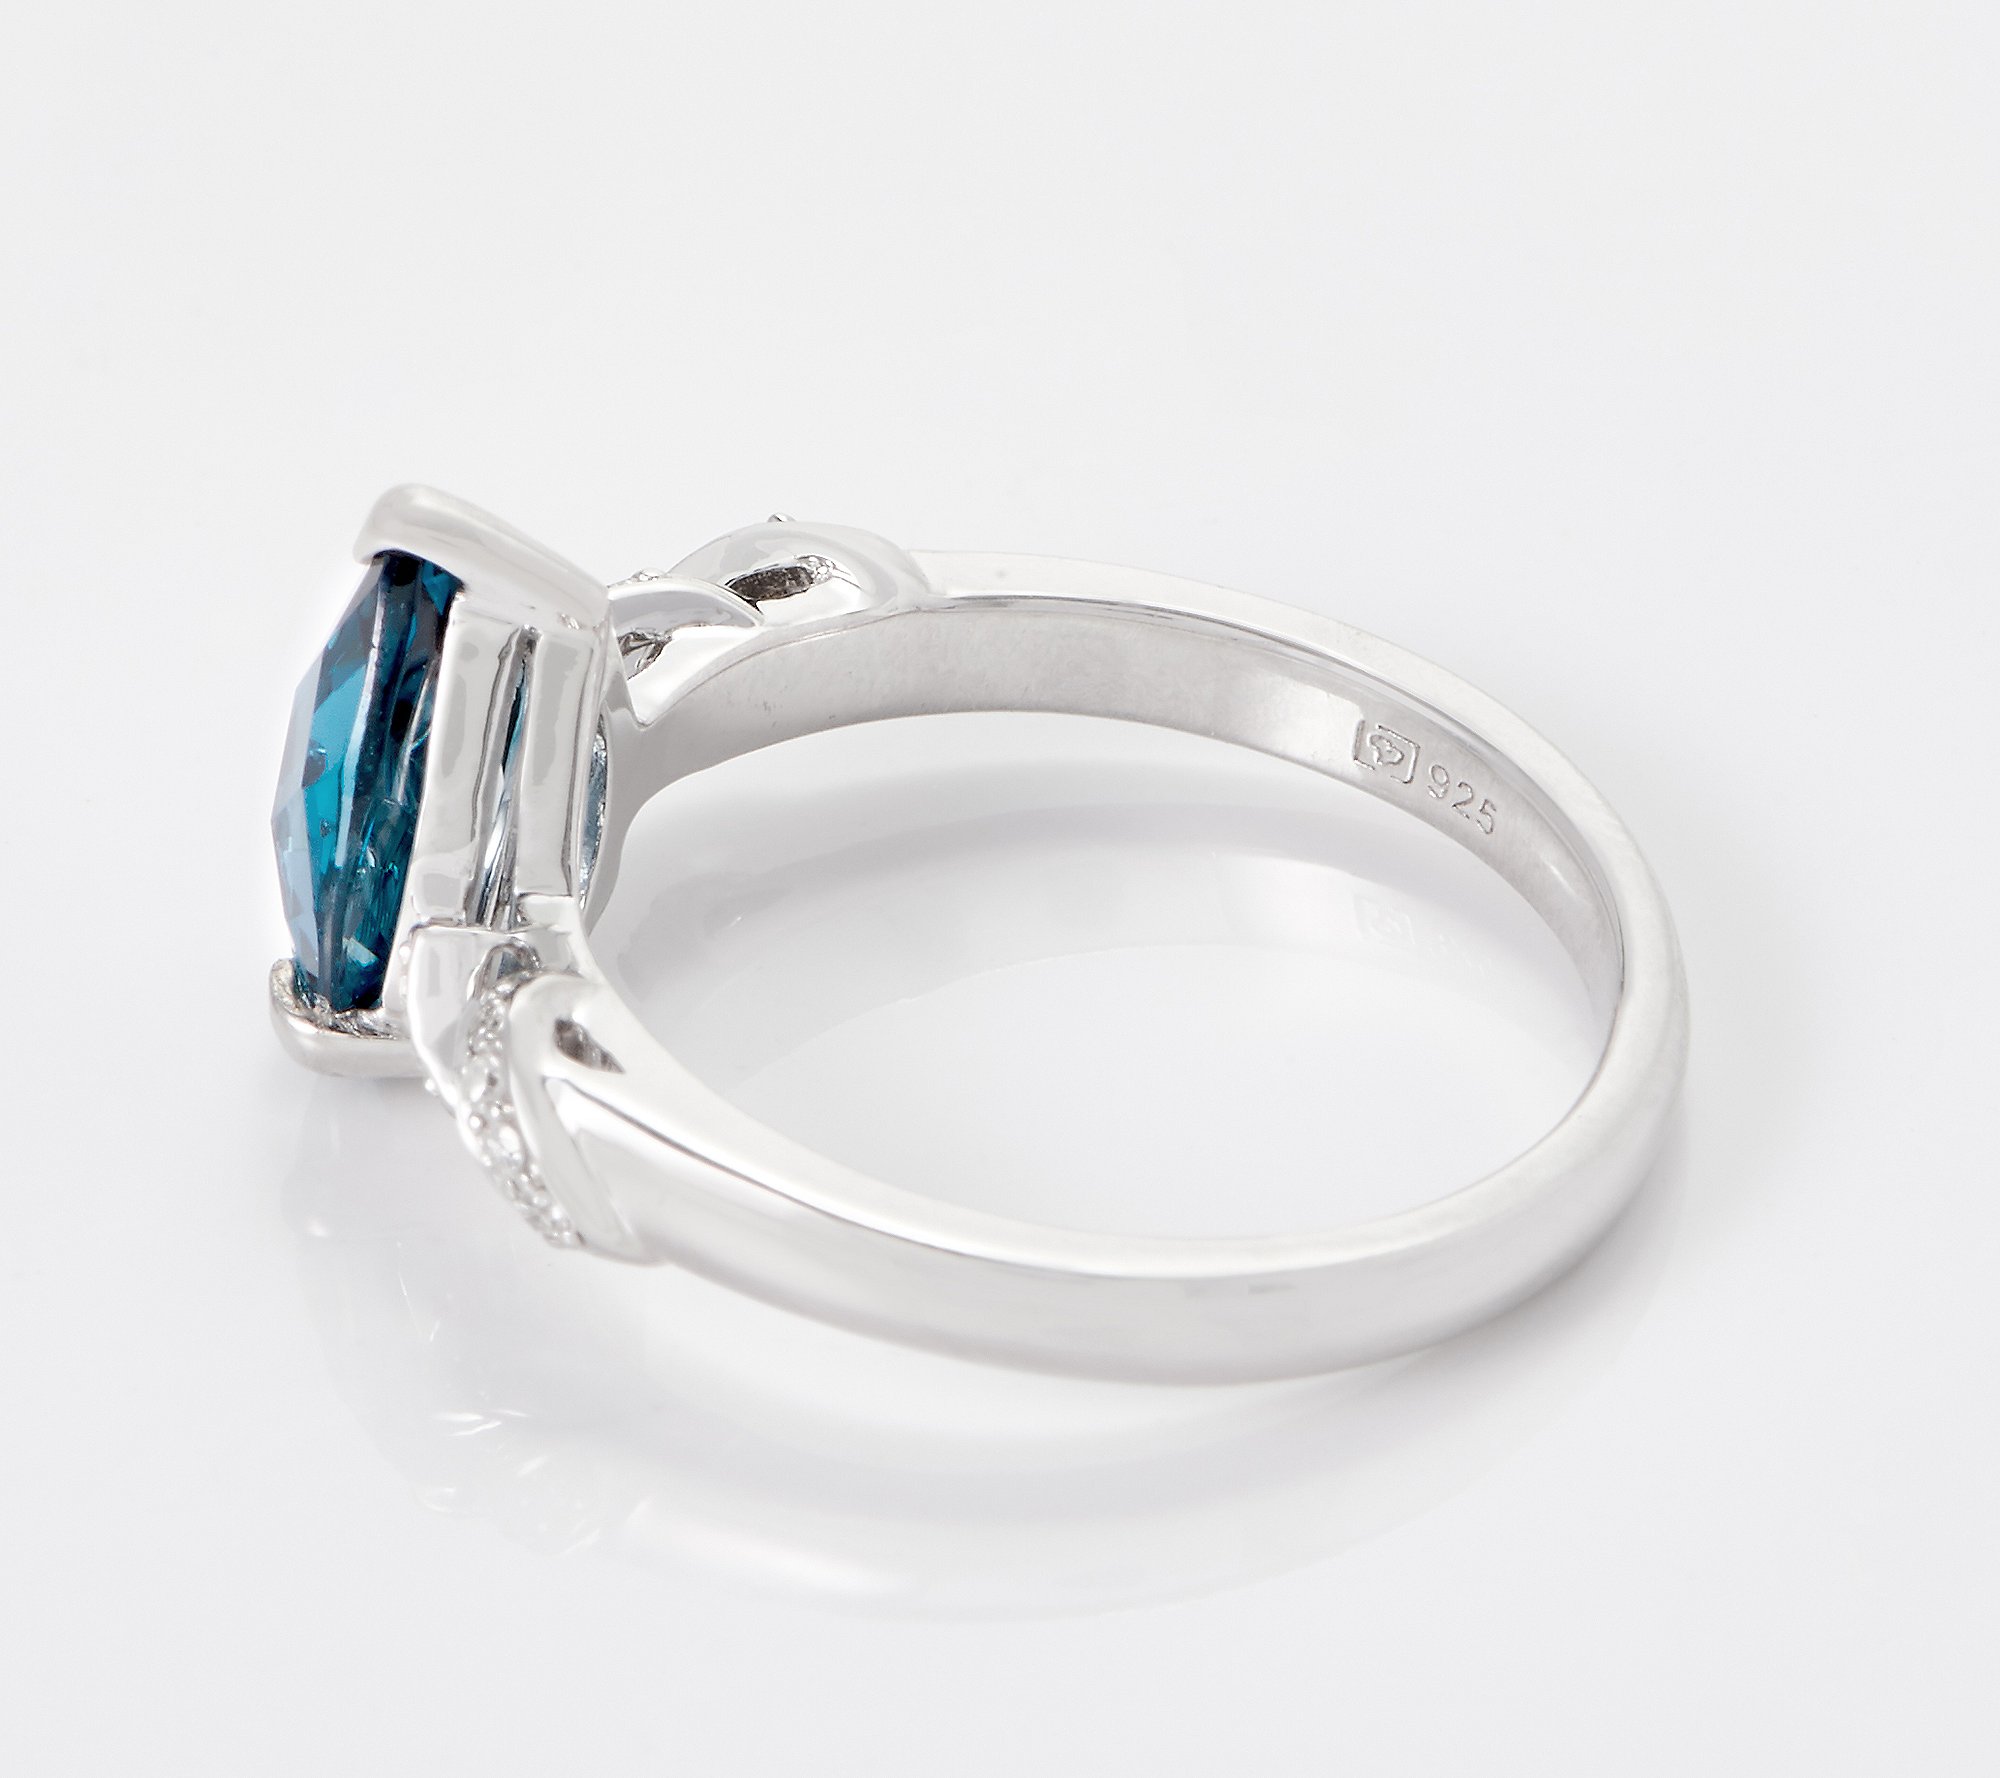 Womens Art Deco Size 7 Blue Topaz and Sterling Silver Ring Vintage QVC